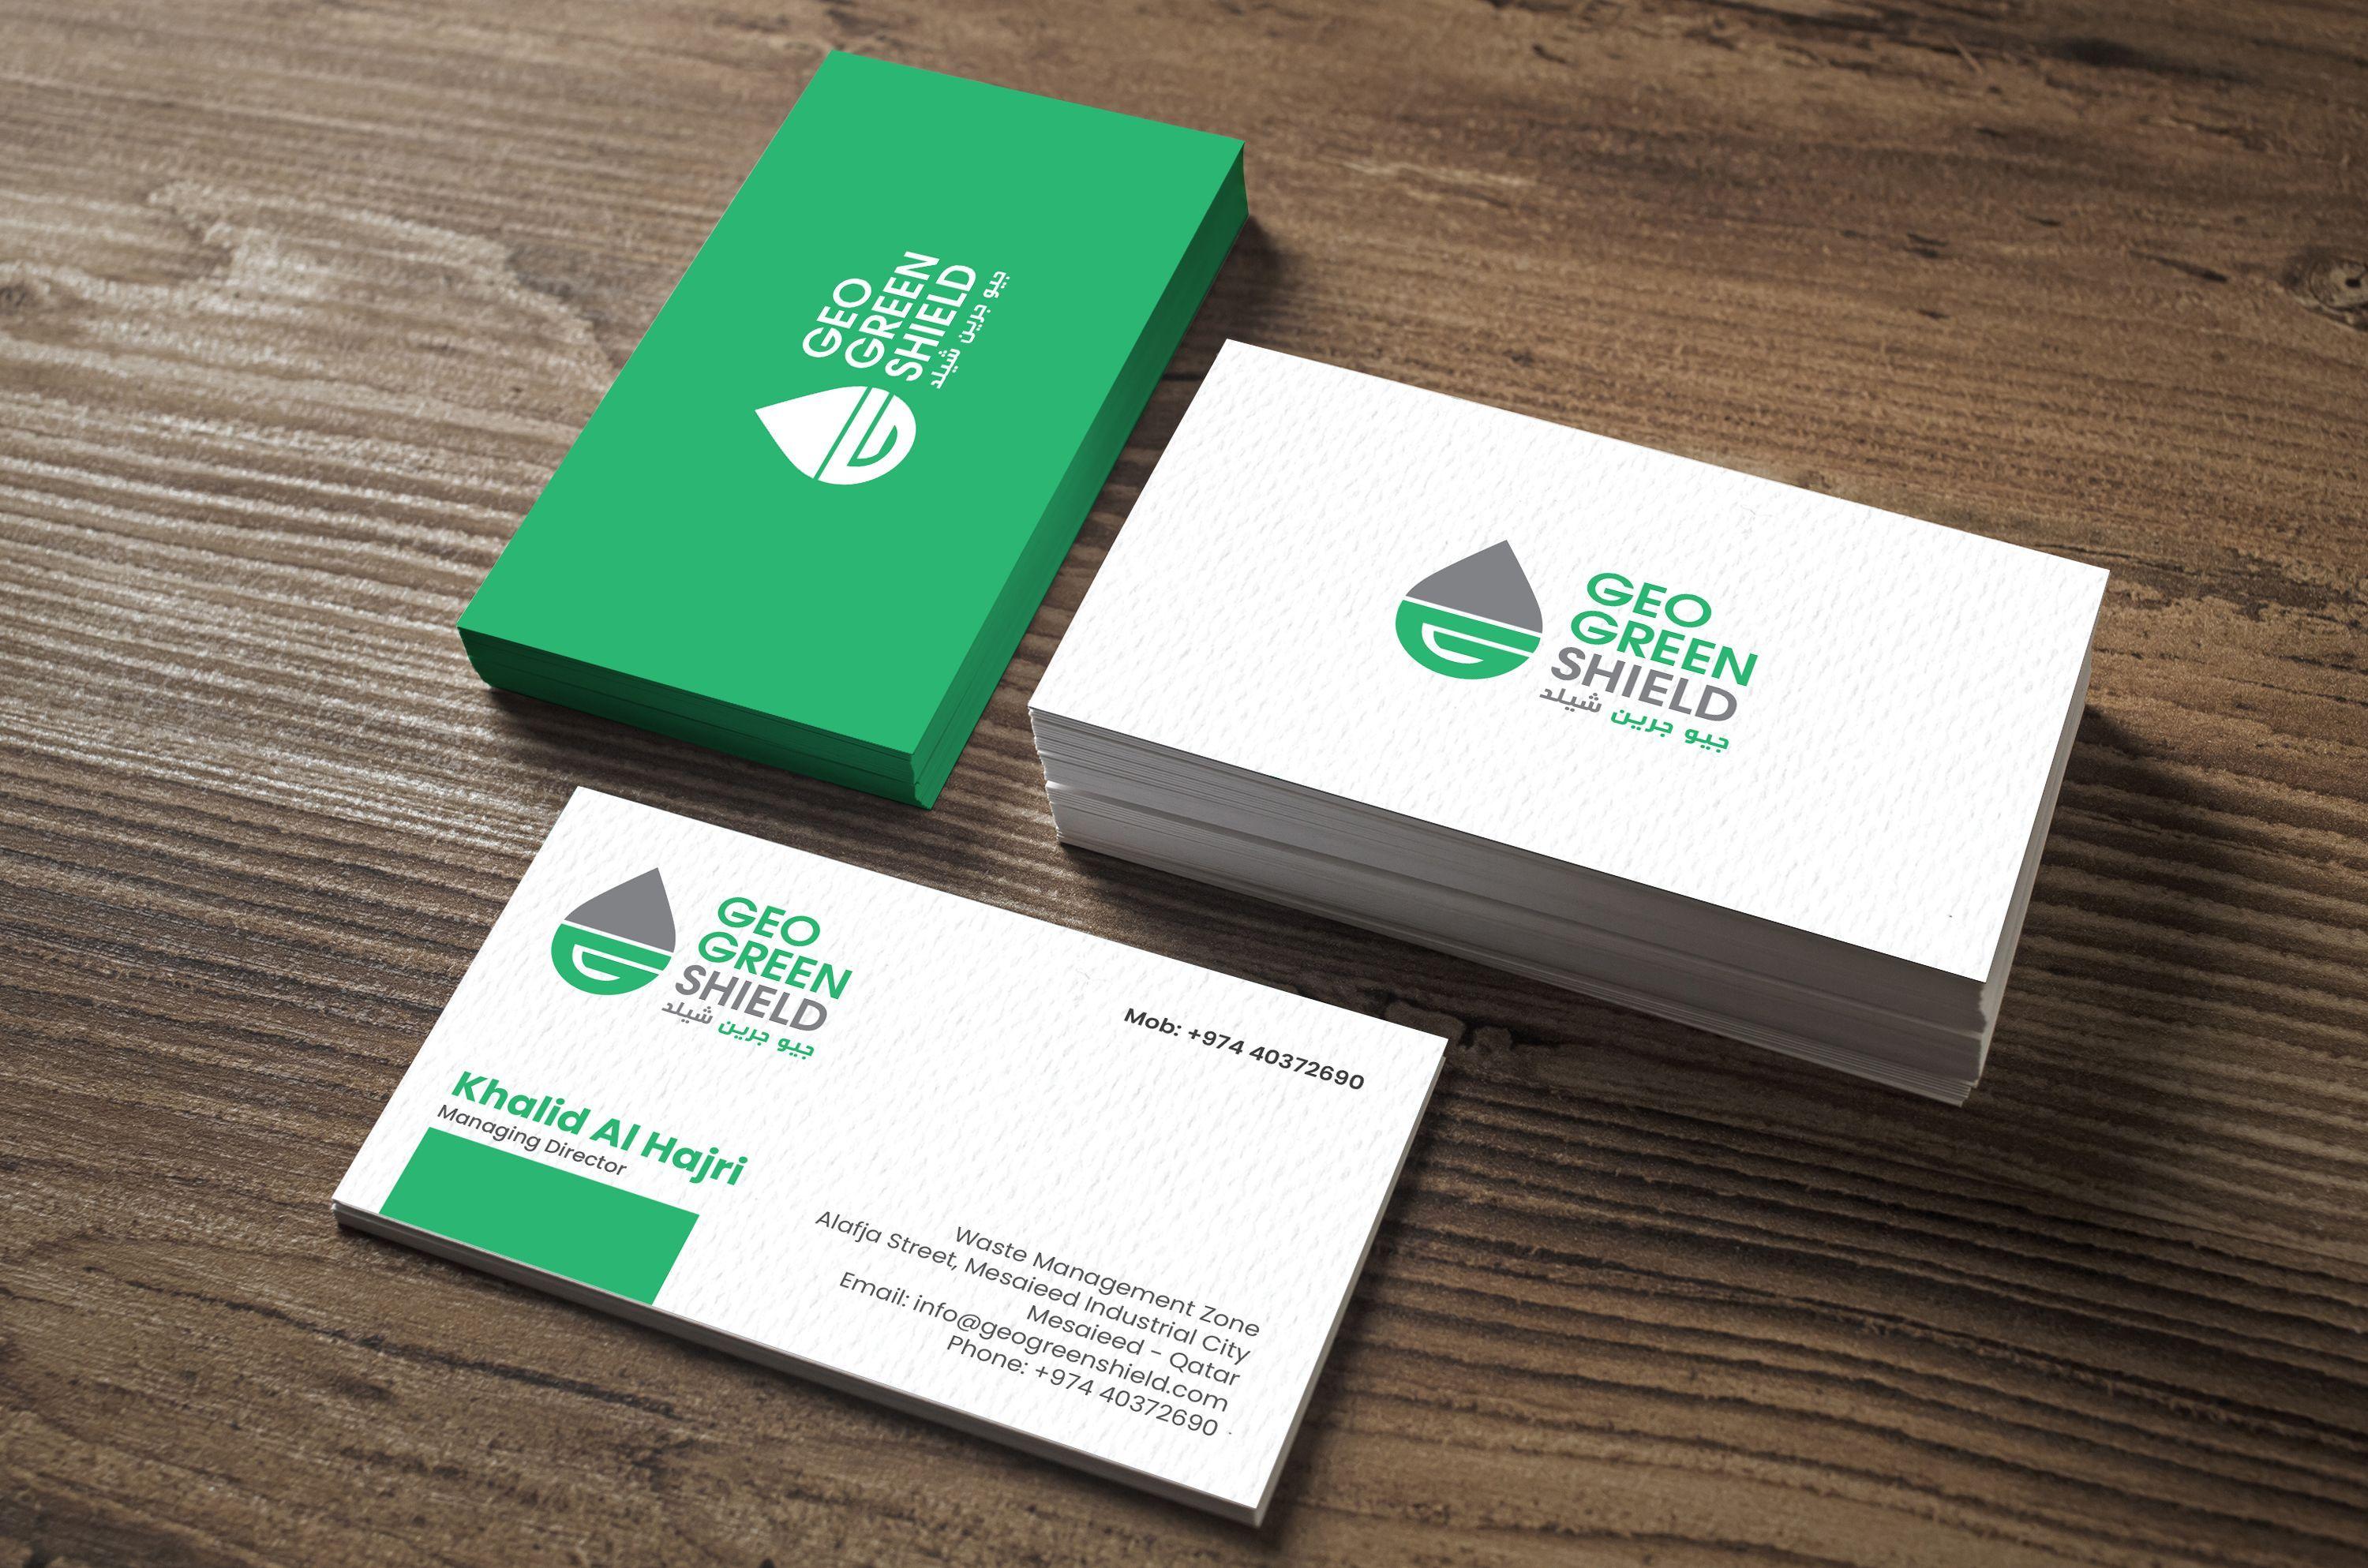 Green Shield with Company Logo - Our new work, Client: GEO GREEN SHIELD Company branding | Logo ...